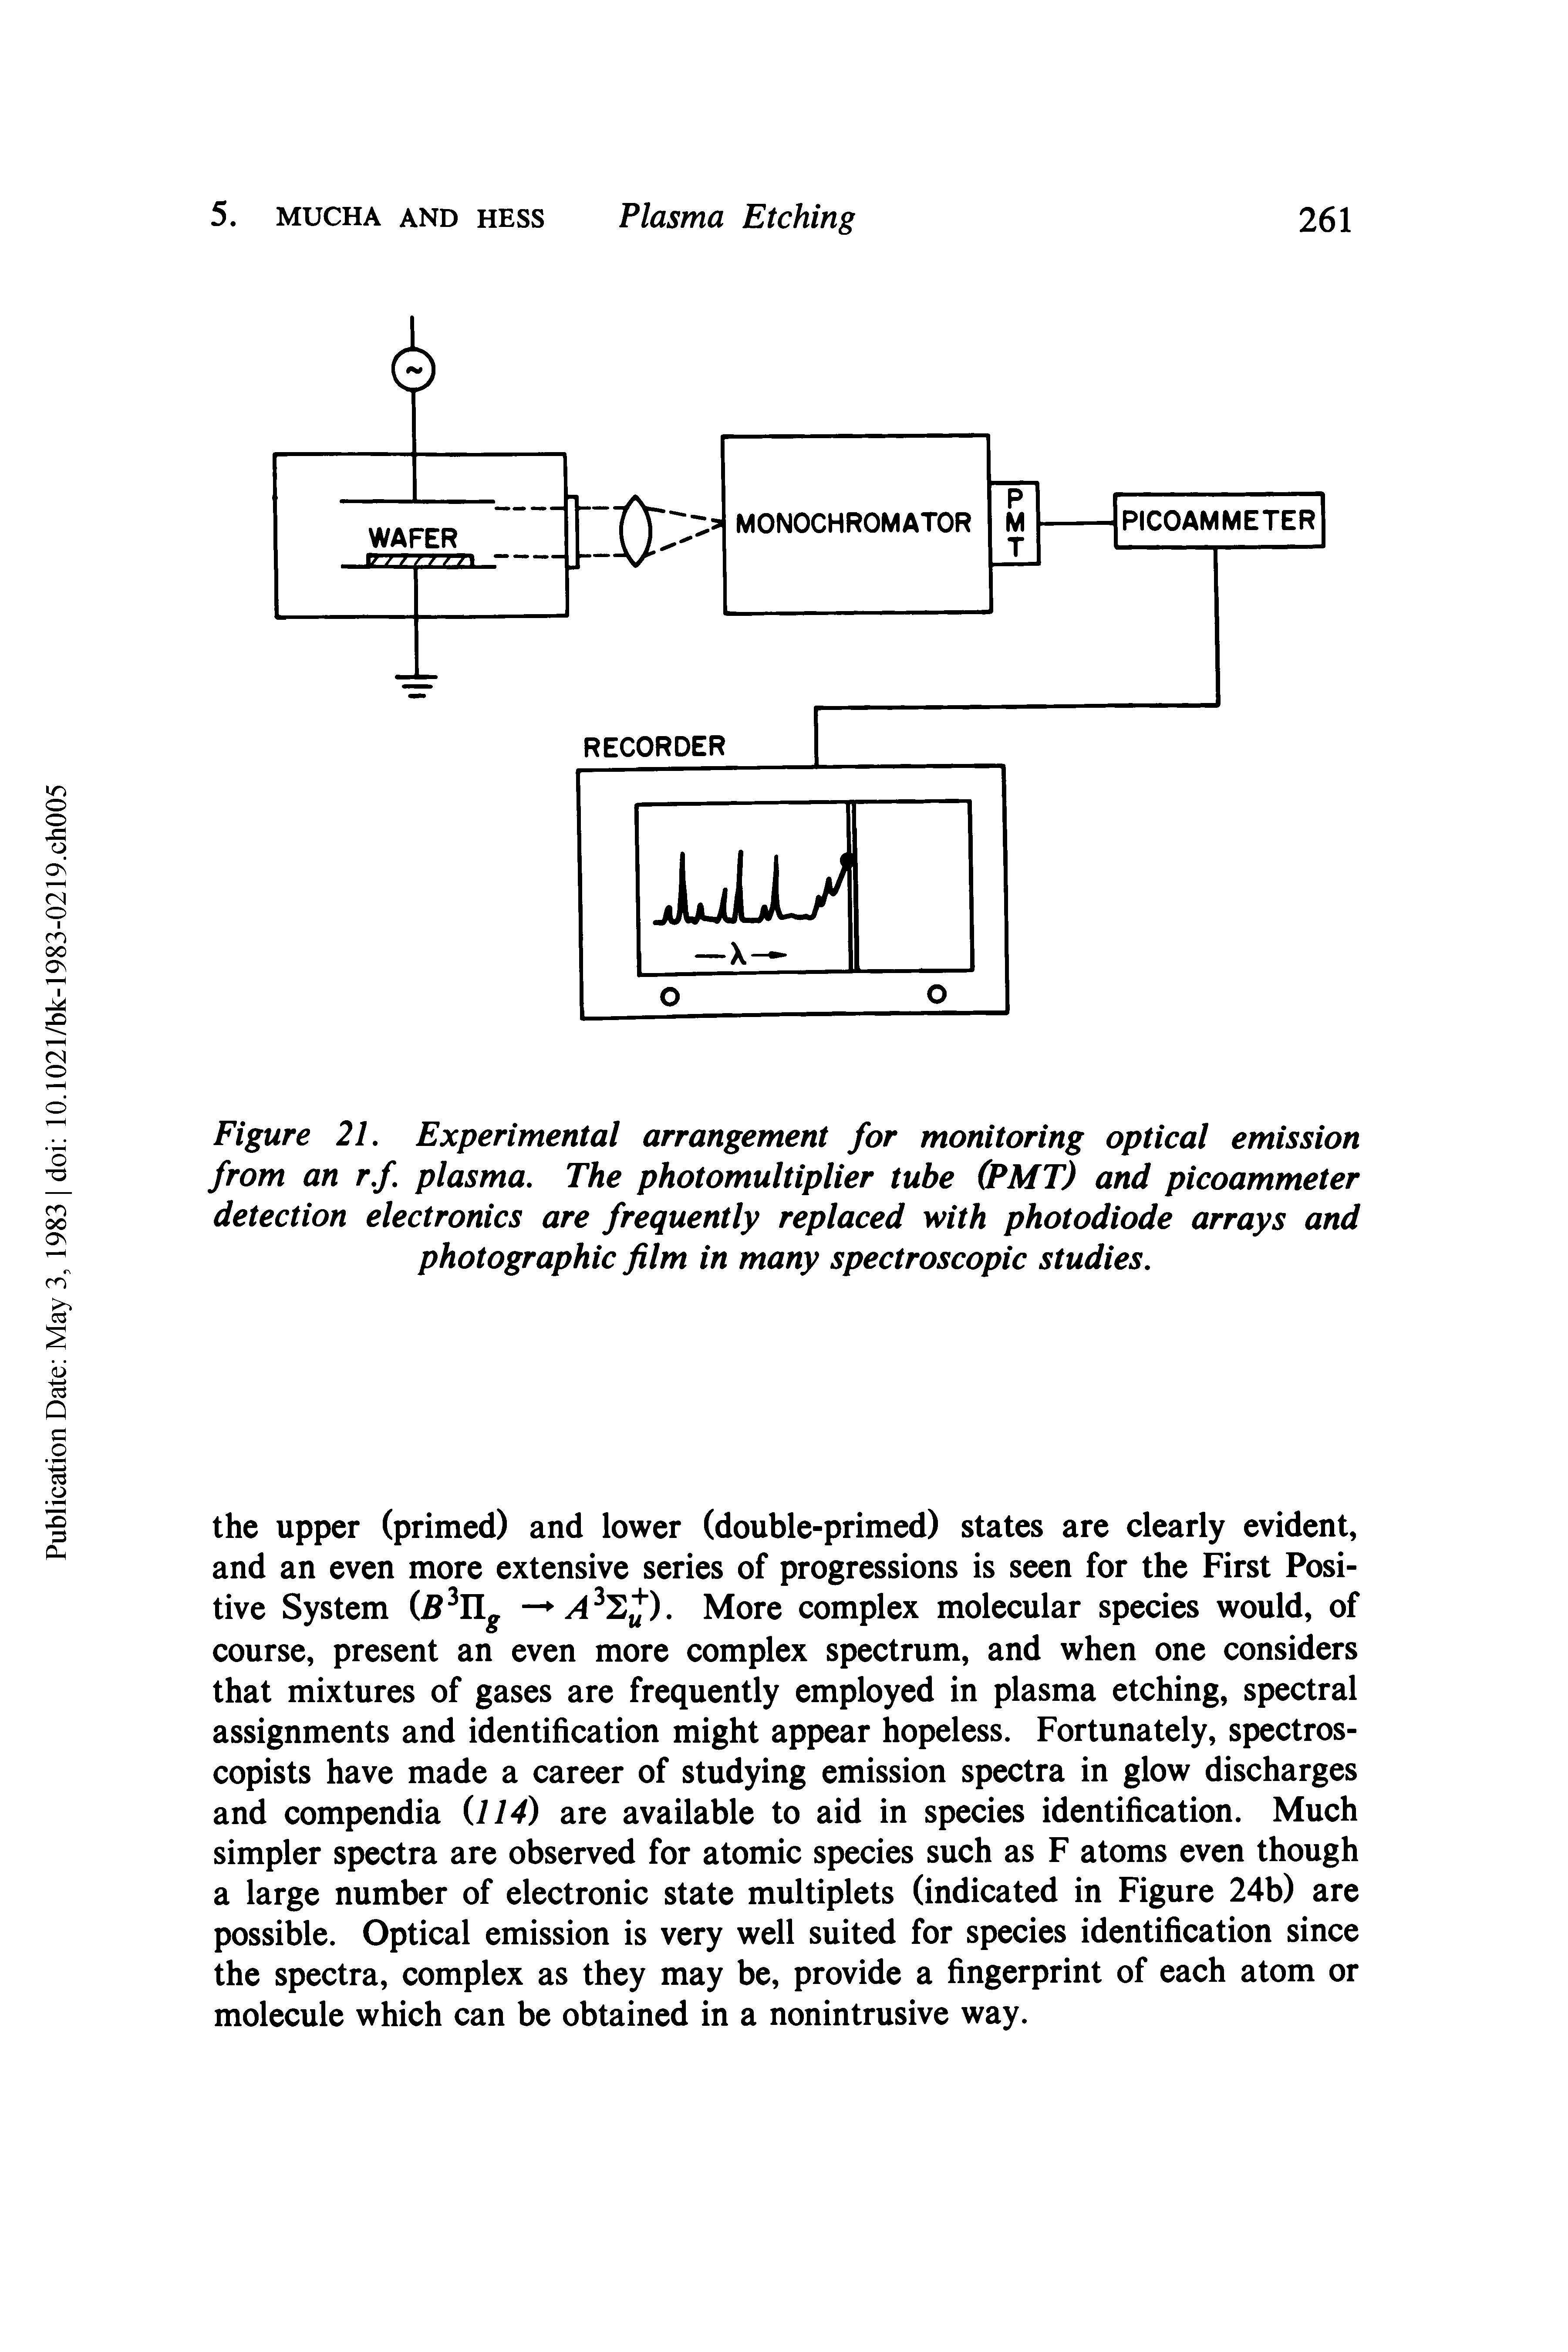 Figure 21. Experimental arrangement for monitoring optical emission from an r.f plasma. The photomultiplier tube (PMT) and picoammeter detection electronics are frequently replaced with photodiode arrays and photographic film in many spectroscopic studies.